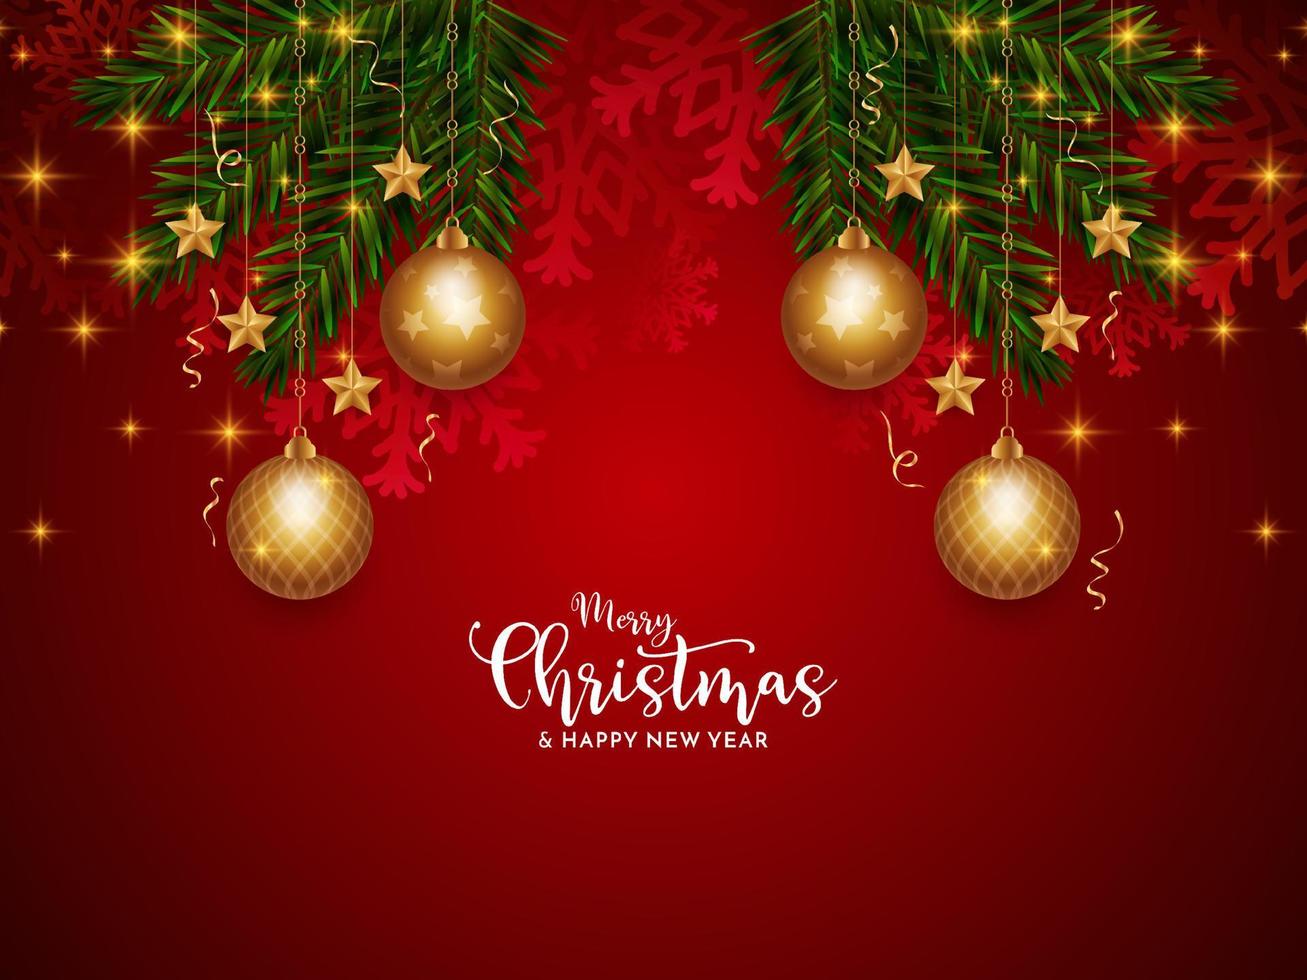 Merry Christmas festival red color glowing background design vector